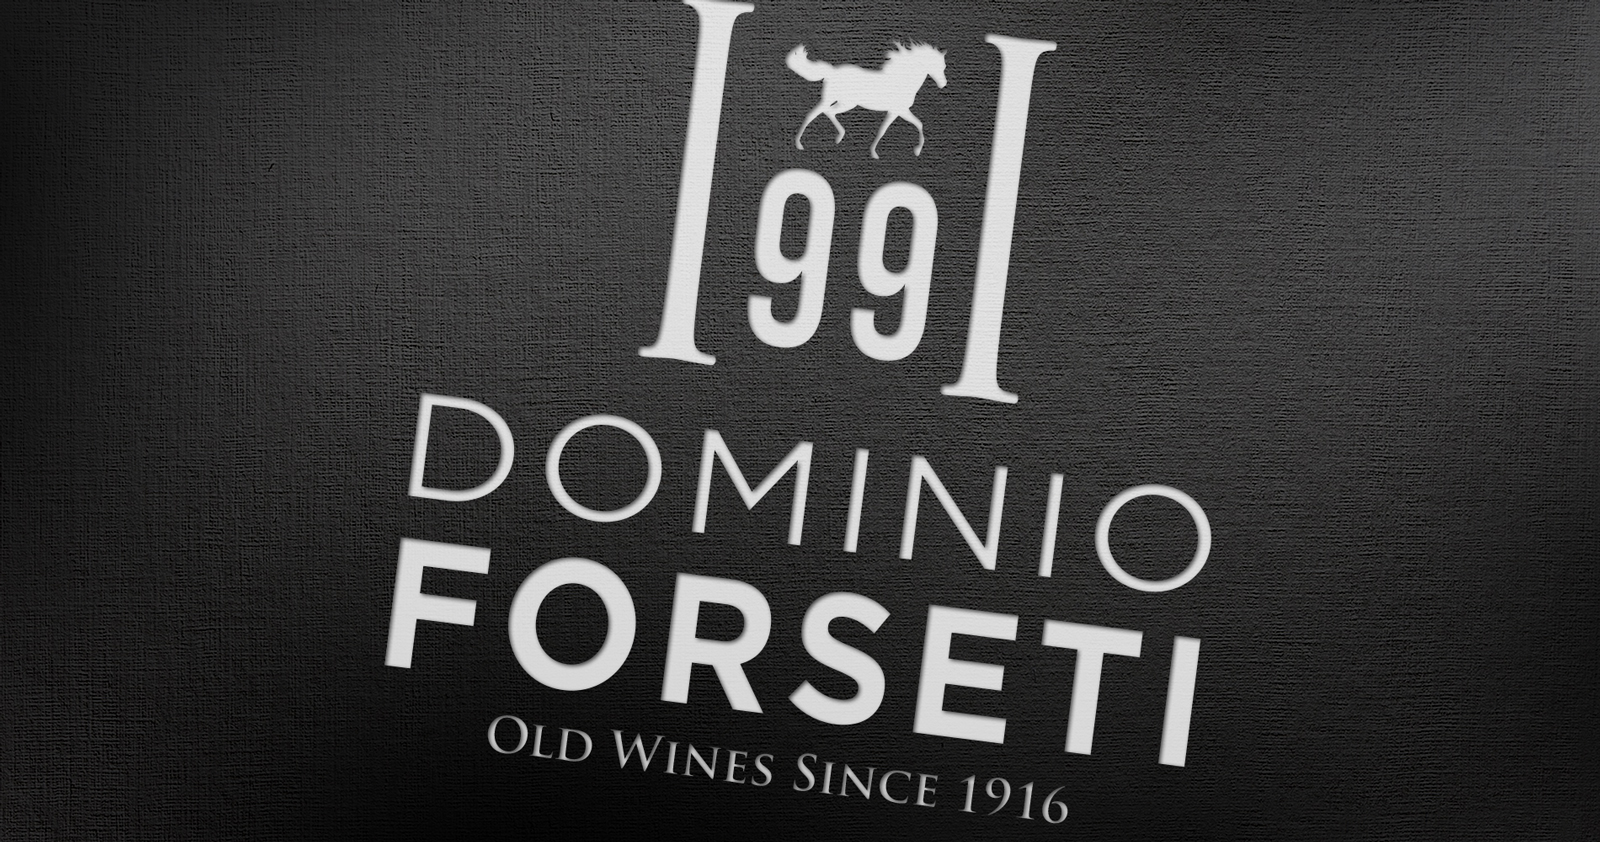 Portfolio of graphic and creative design works on wine labels and packaging for Spanish wine: DOMINIO FORSETI for export to Asian countries and China